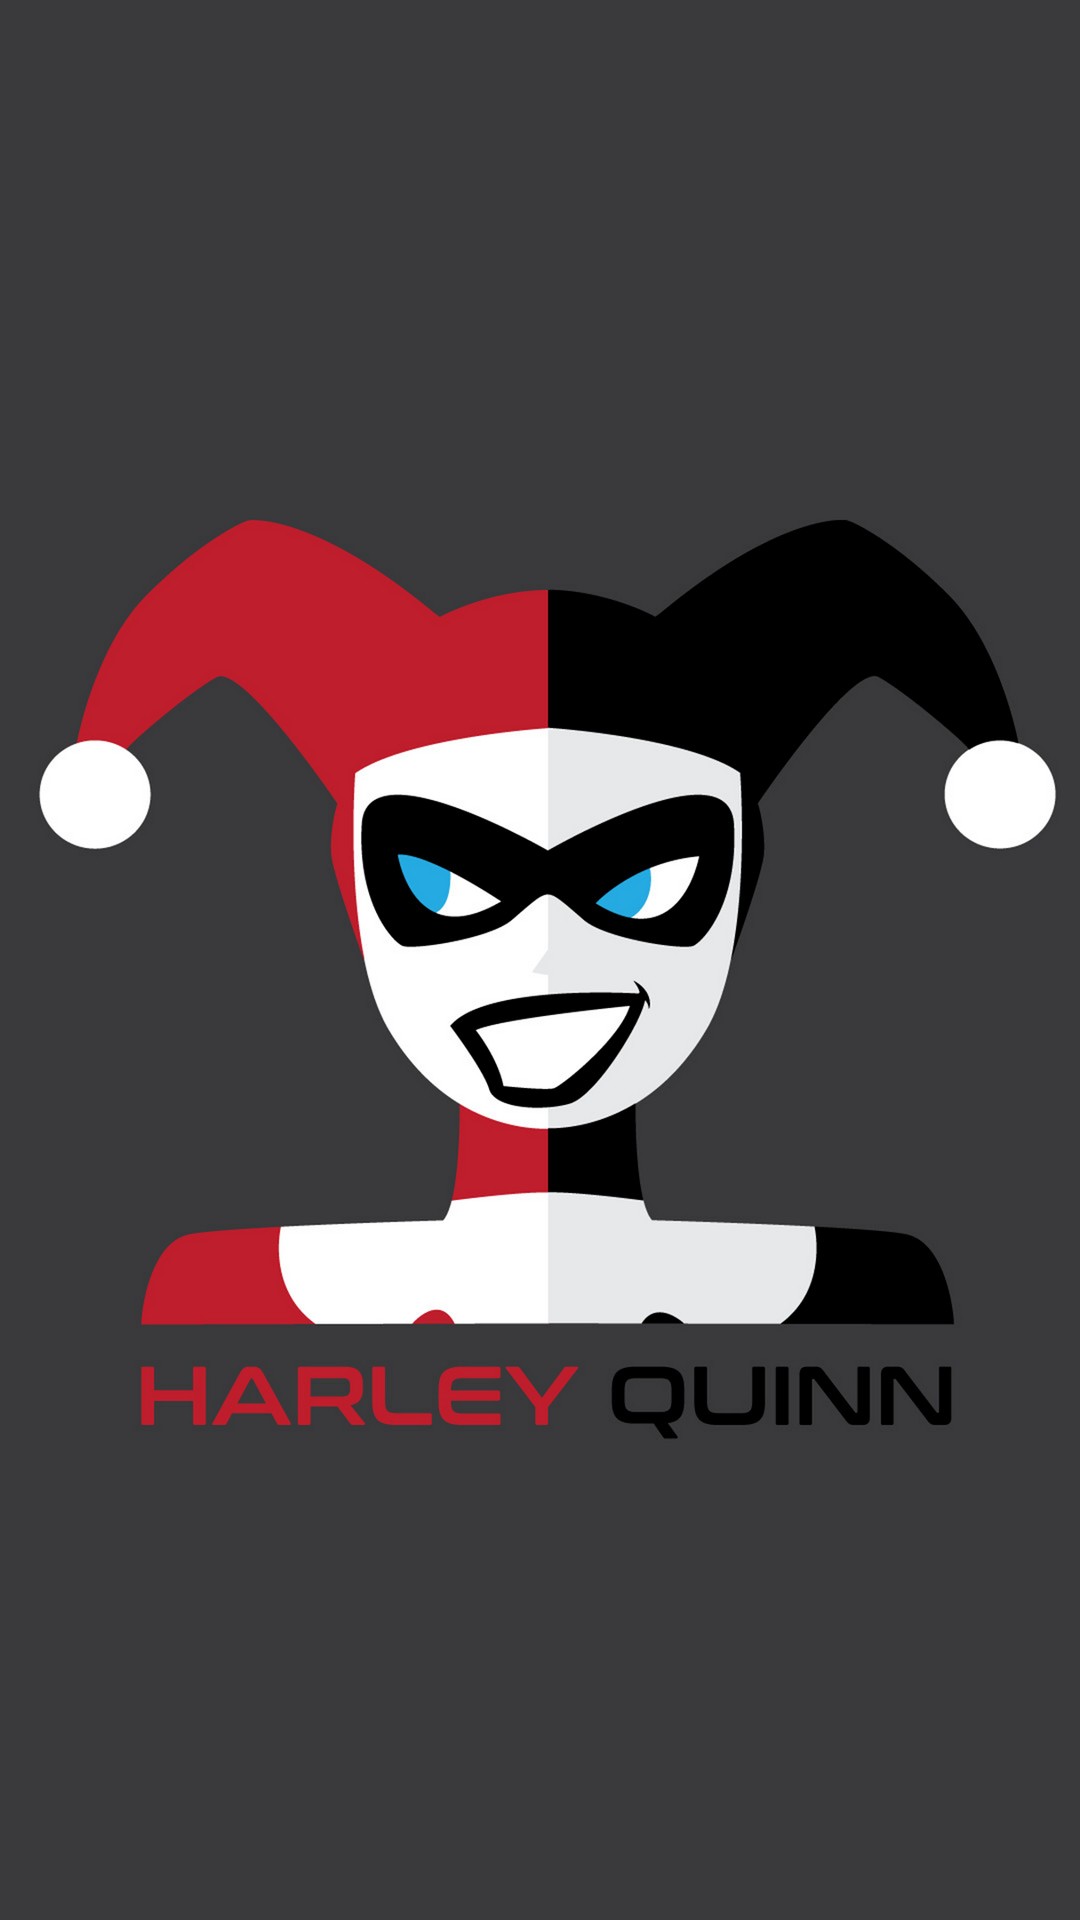 Pictures Of Harley Quinn Wallpaper iPhone with resolution 1080X1920 pixel. You can make this wallpaper for your iPhone 5, 6, 7, 8, X backgrounds, Mobile Screensaver, or iPad Lock Screen